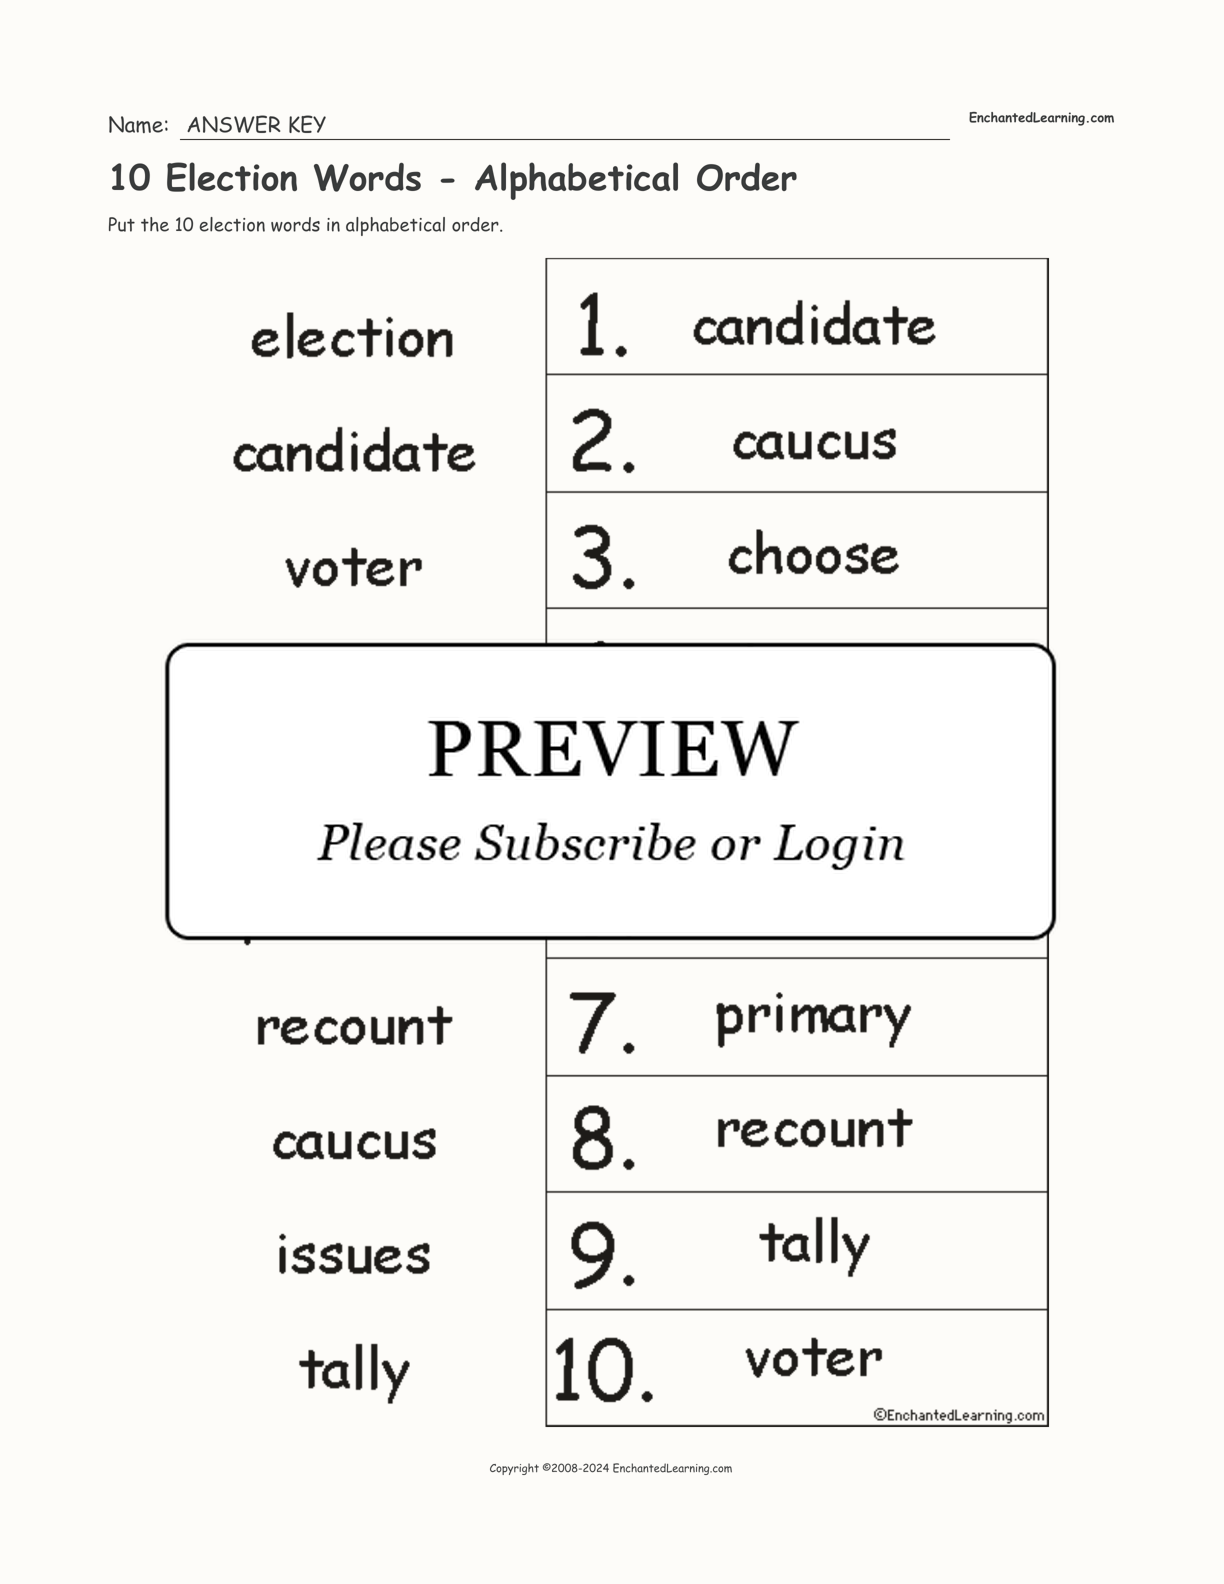 10 Election Words - Alphabetical Order interactive worksheet page 2